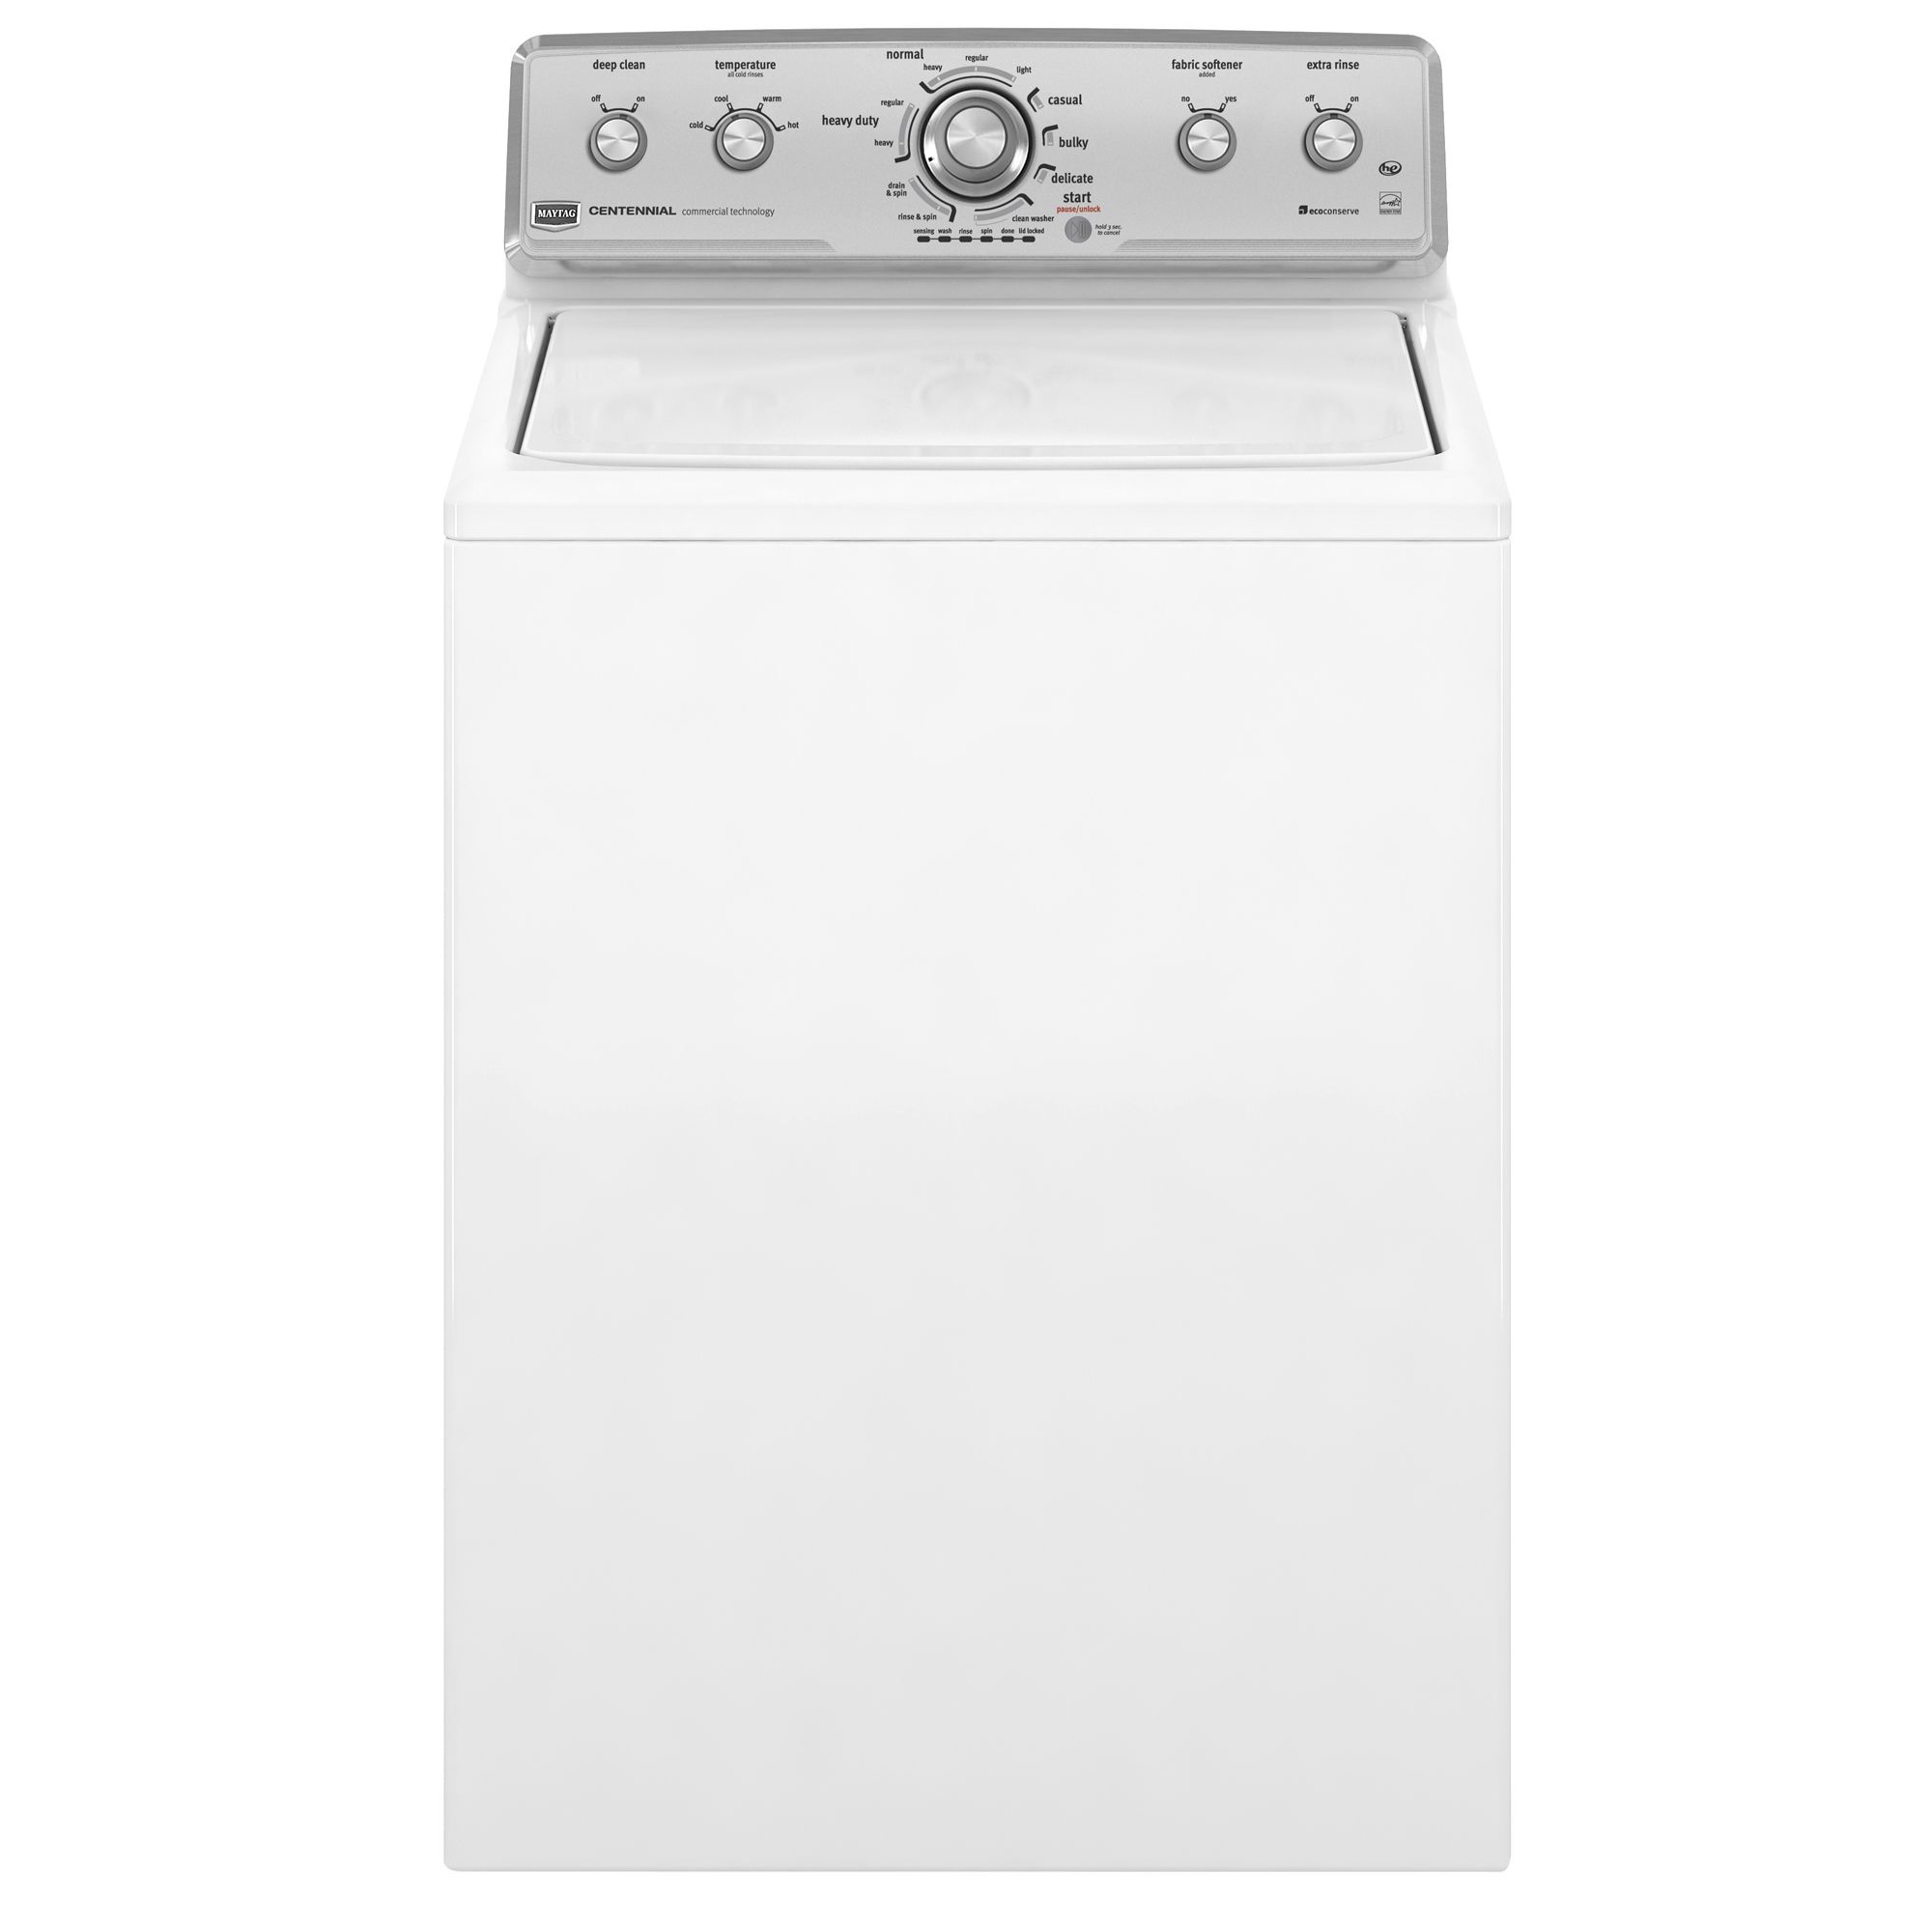 Maytag 3.6 cu. ft. Centennial High-Efficiency Top-Load Washer - White